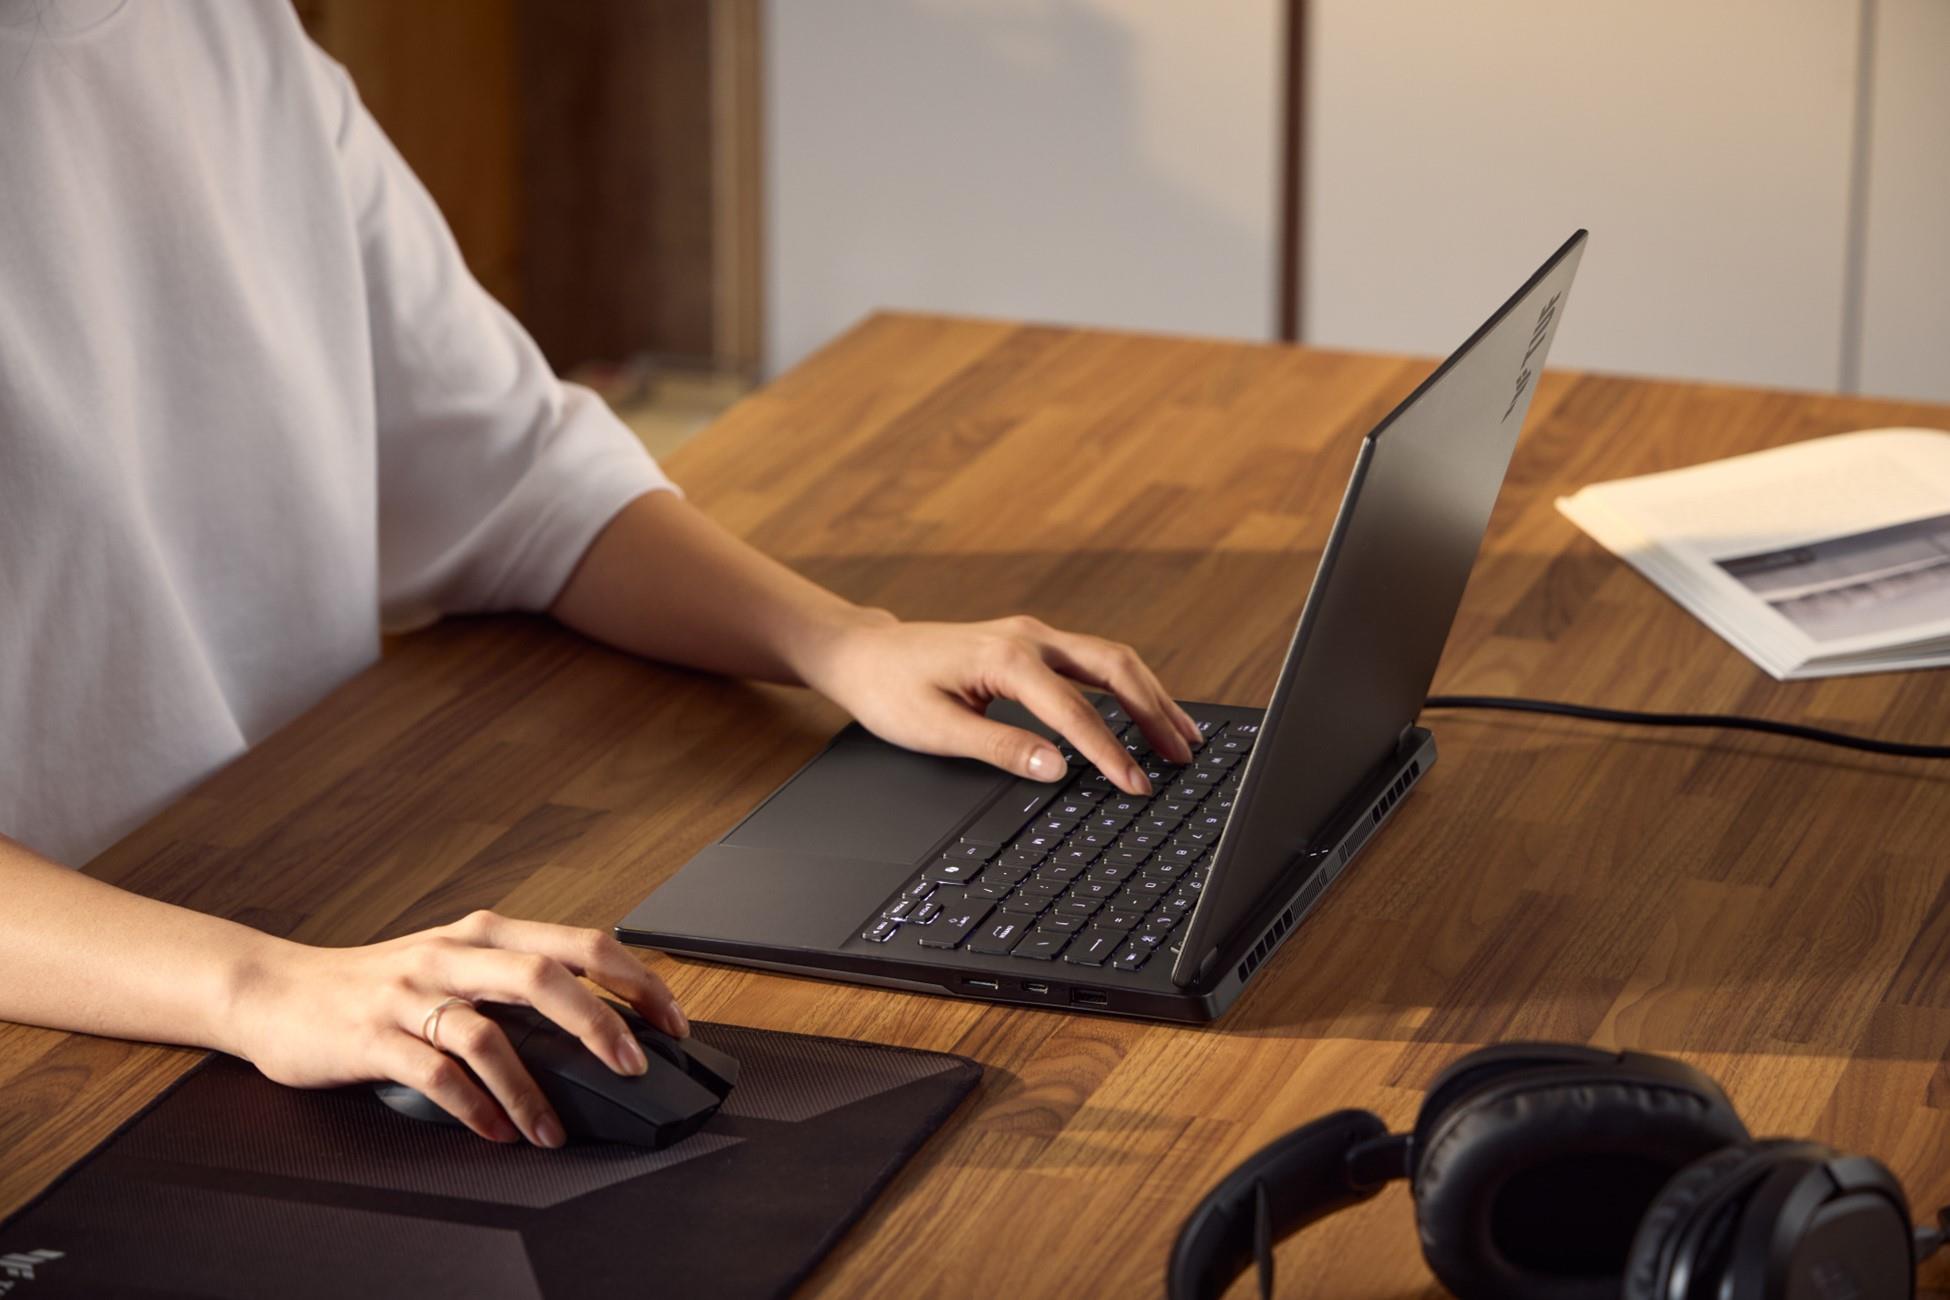 An ASUS laptop being used on an office desk